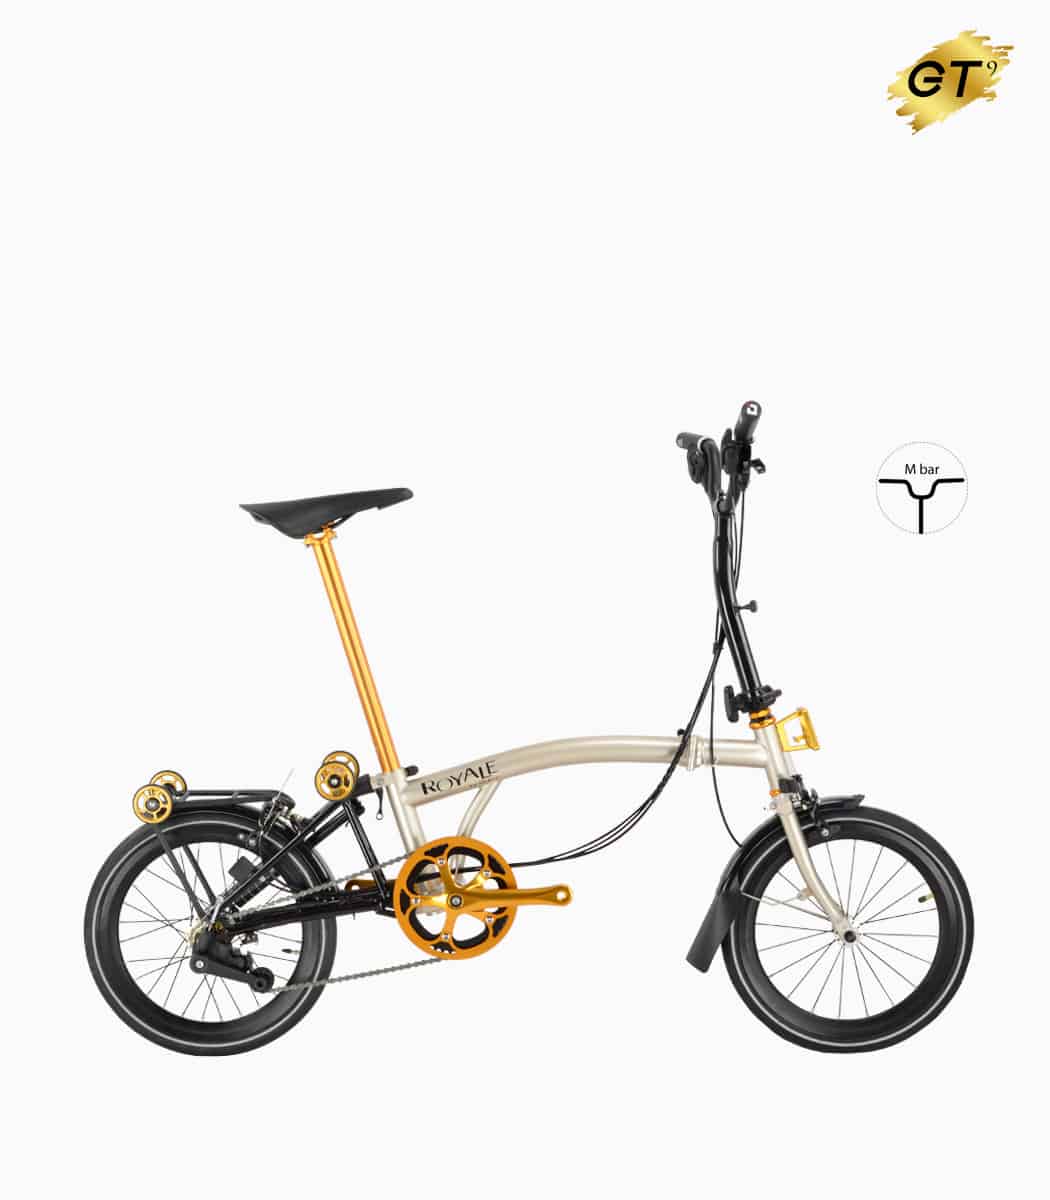 MOBOT ROYALE GT M9 (CHAMPAGNE GOLD) foldable bicycle gold edition M-bar with tyres with reflective strip high profile rim right